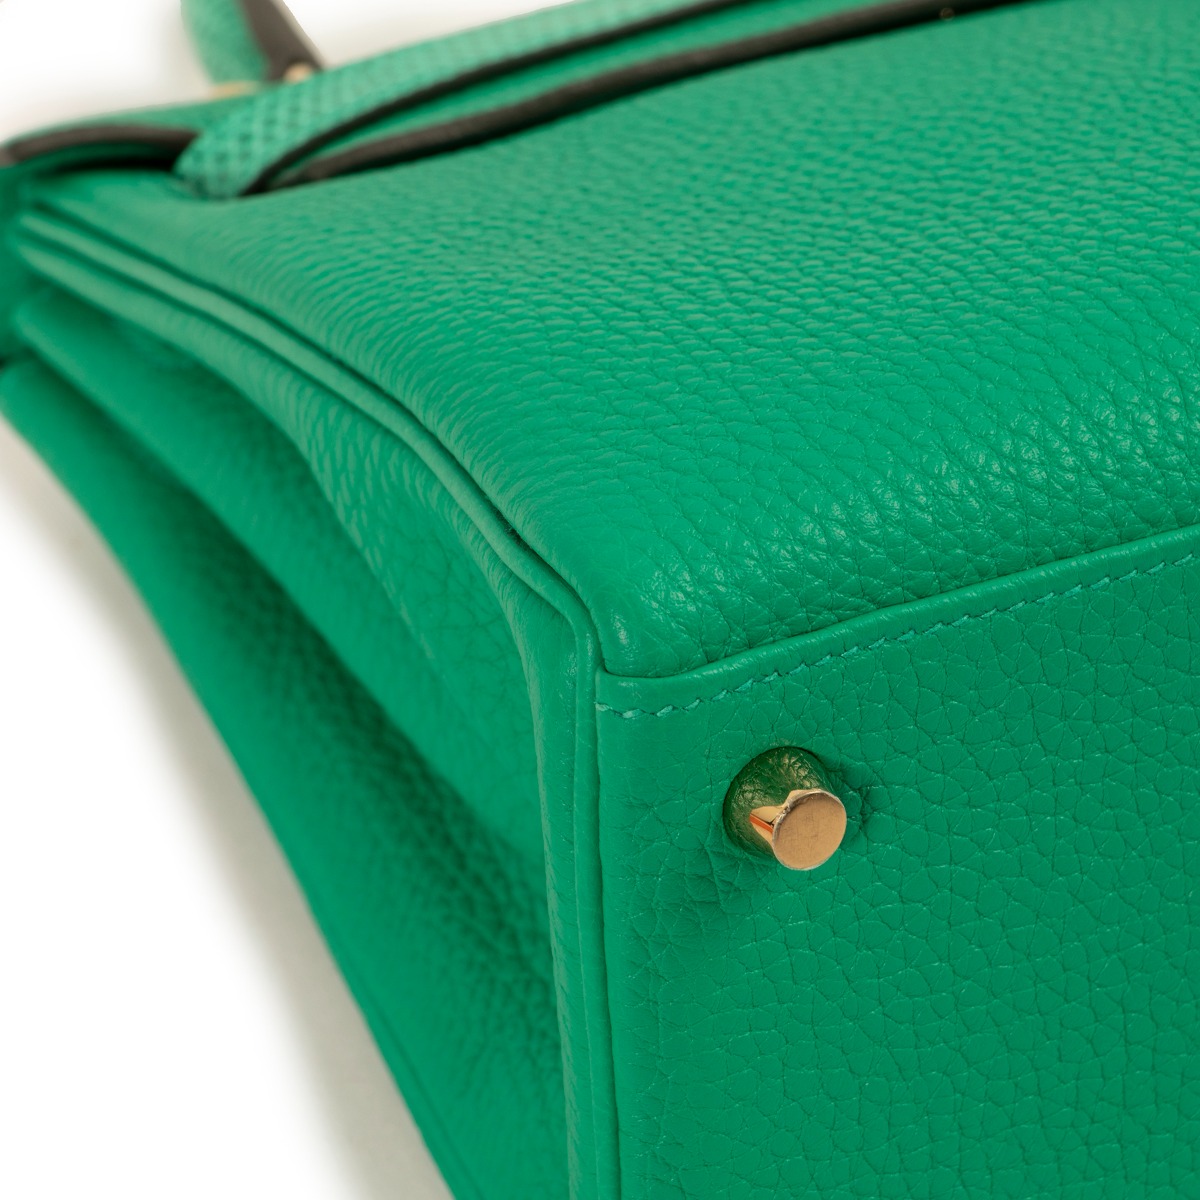 Hermès Kelly 25 Retourne Touch Menthe Togo and Lizard Gold Hardware